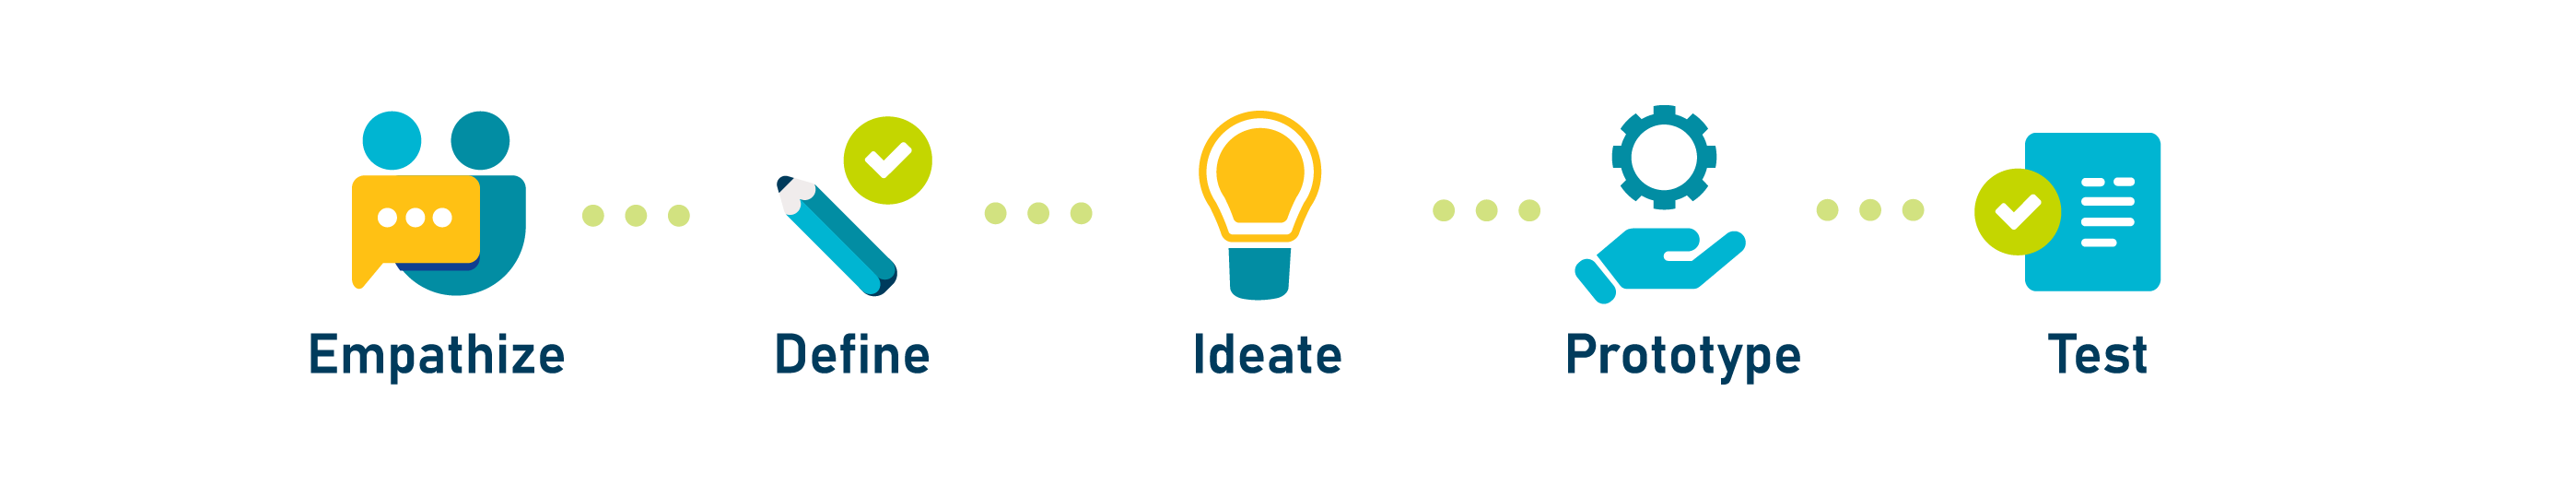 Design thinking process  steps from empathize, define, ideate, prototype and test